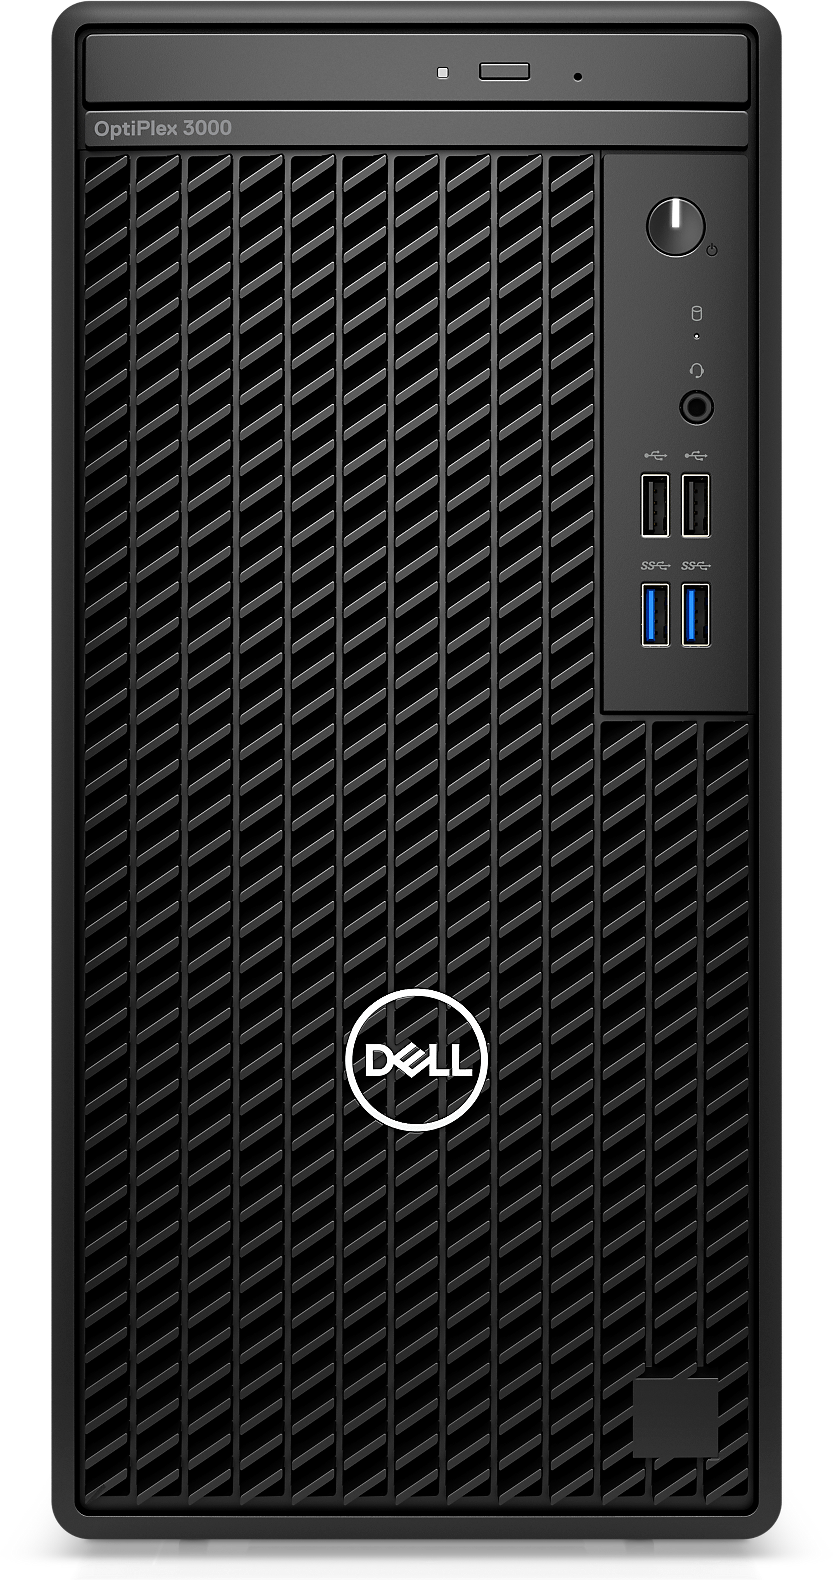 https://i.dell.com/is/image/DellContent/content/dam/ss2/products/desktops-and-all-in-ones/optiplex/3000-tsff/media-gallery/optiplex-3000t-gallery-1.psd?wid=1920&hei=1580&fmt=png-alpha&qlt=90%2c0&op_usm=1.75%2c0.3%2c2%2c0&resMode=sharp&pscan=auto&fit=constrain%2c1&align=0%2c0